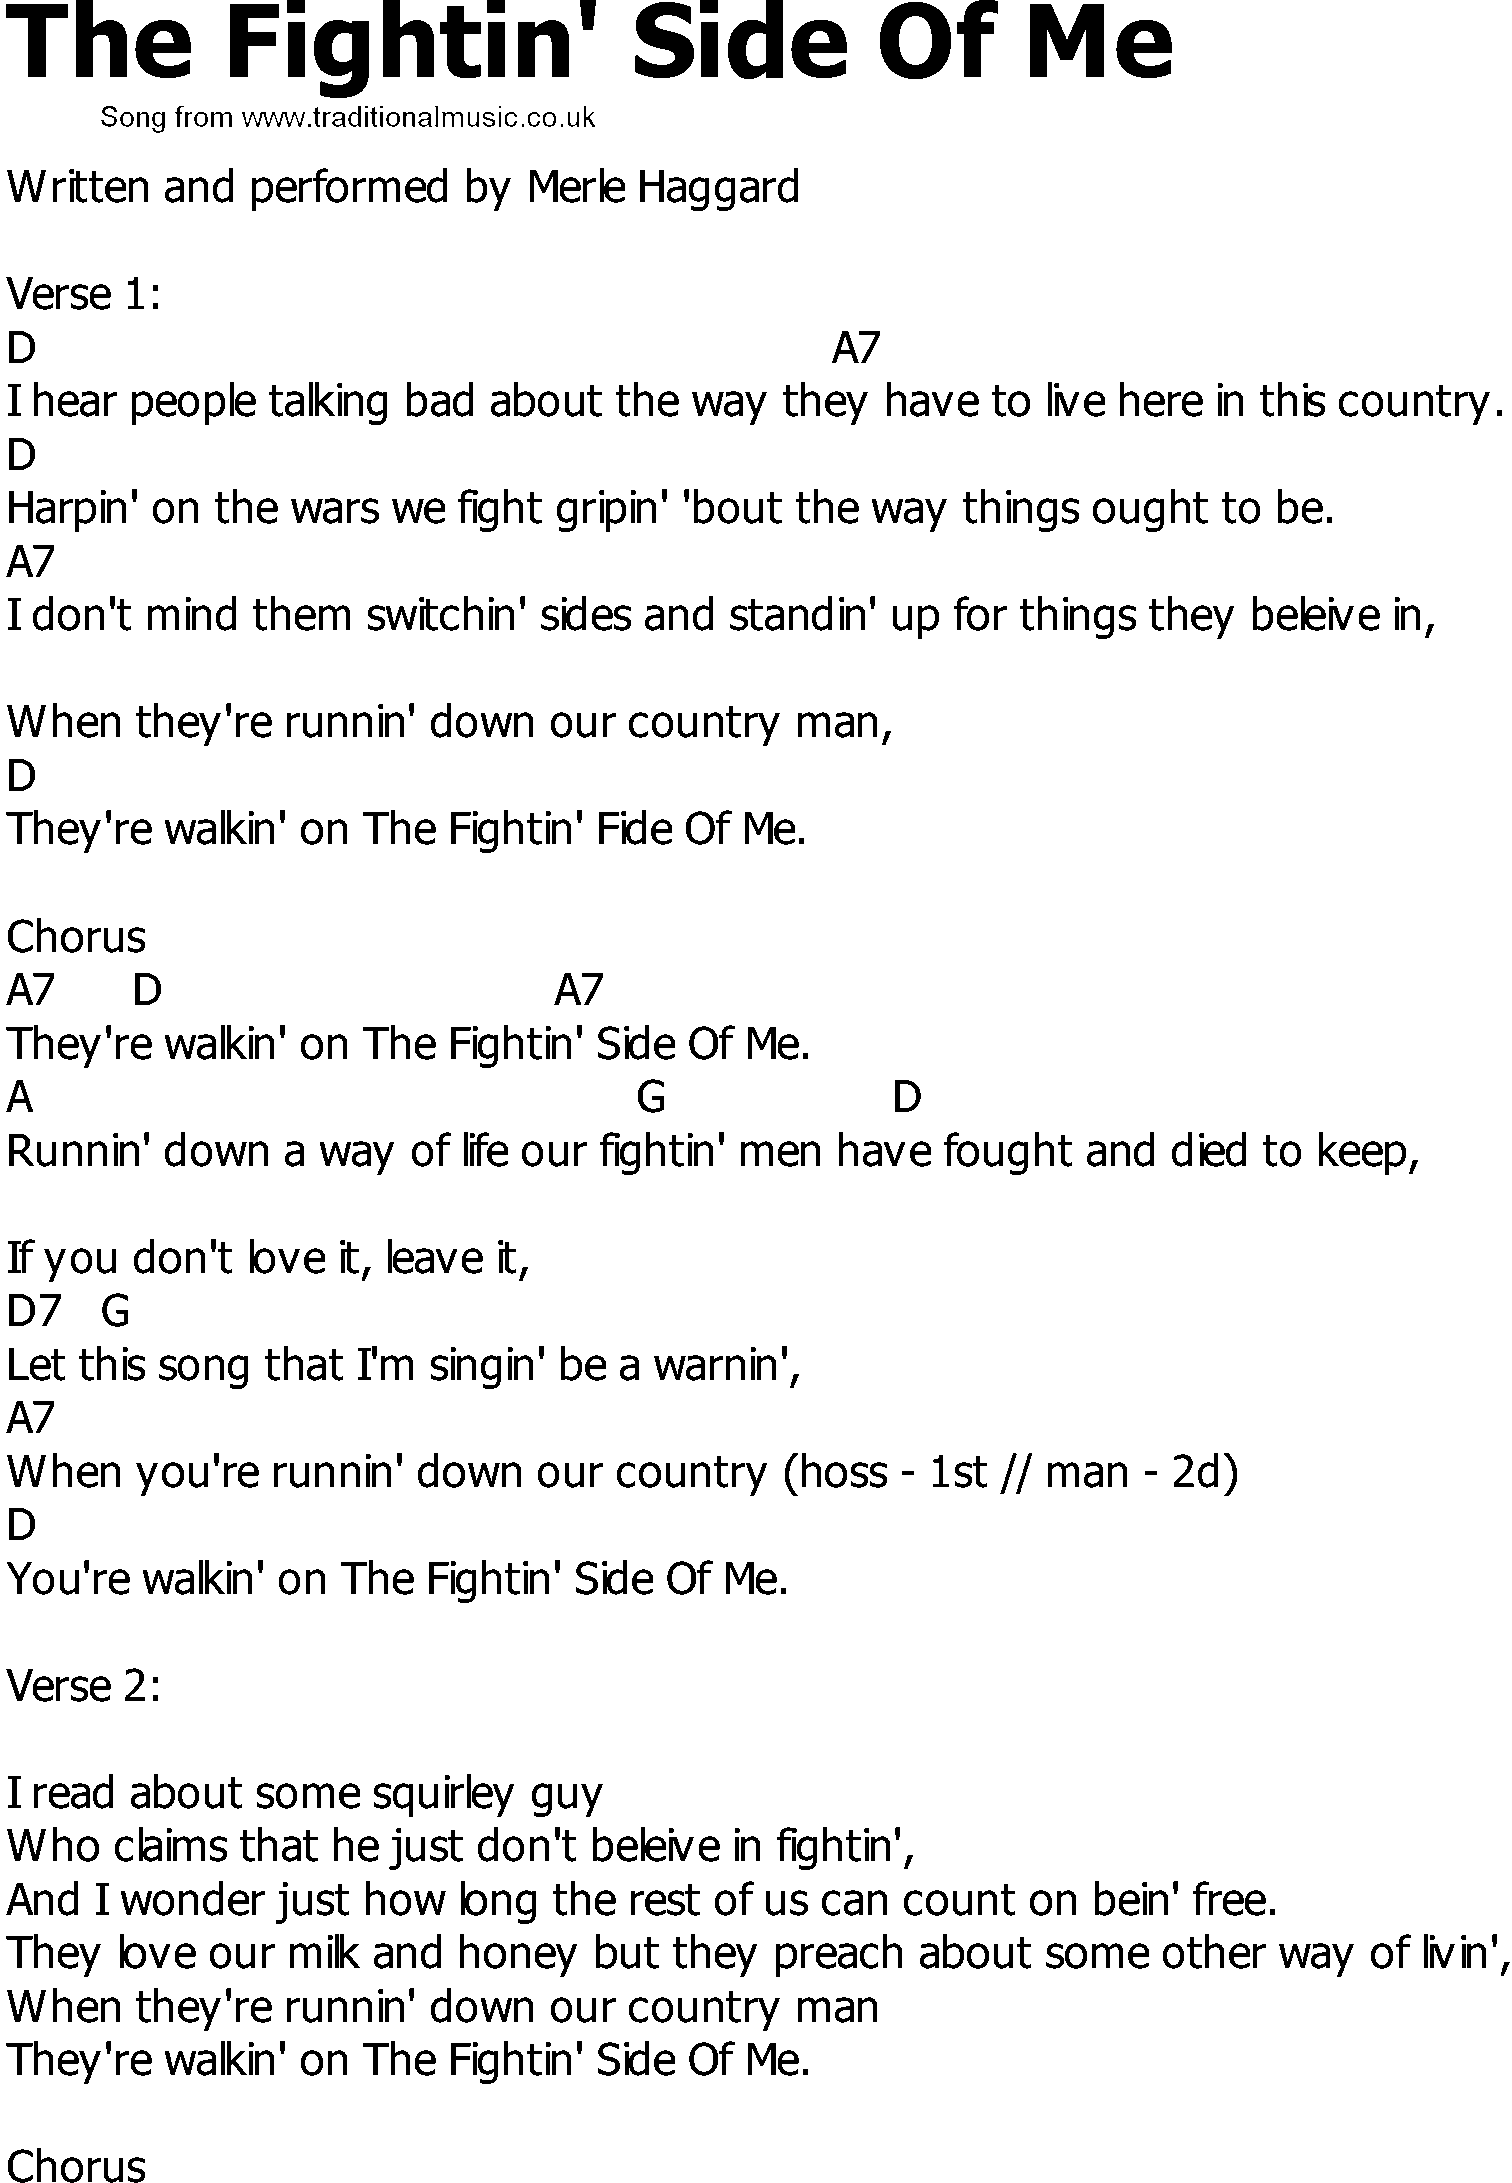 Old Country song lyrics with chords - The Fightin Side Of Me